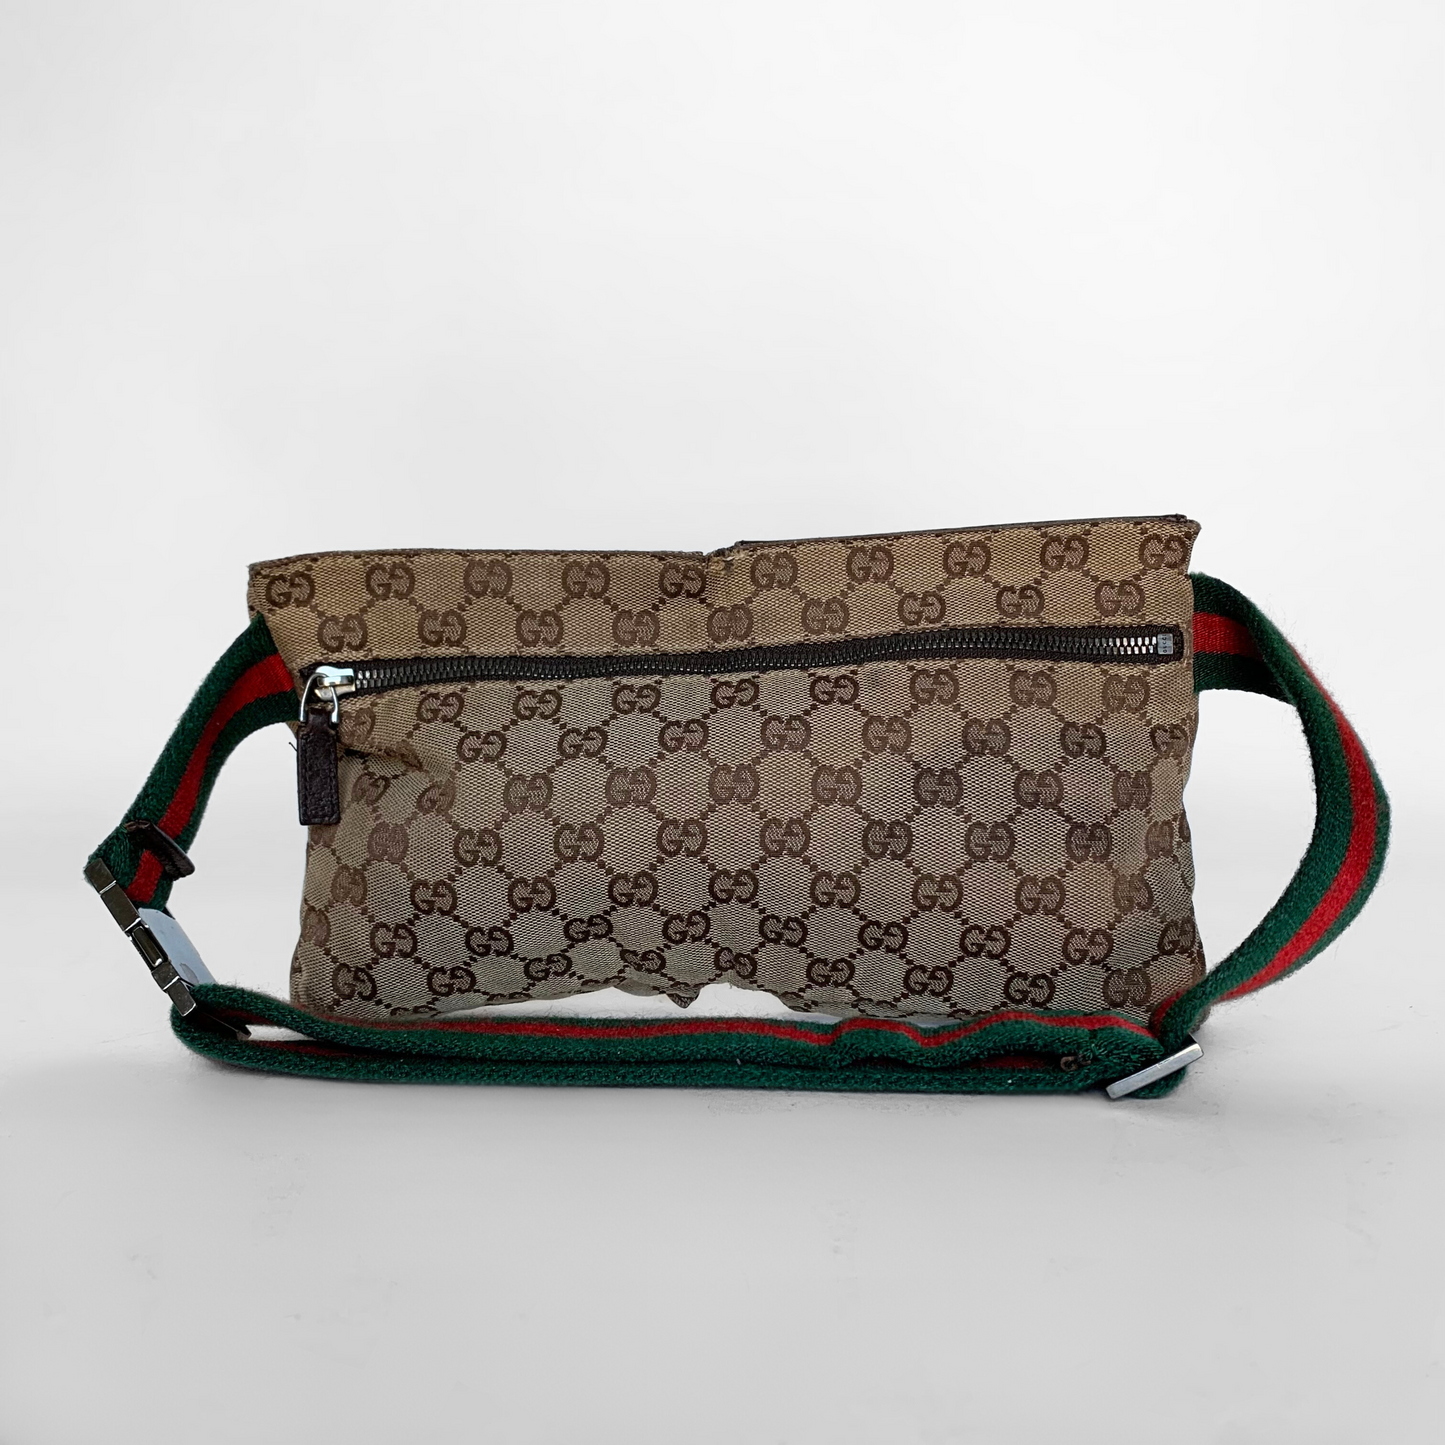 Gucci Gucci Fanny Pack Canvas - Fanny packs - Etoile Luxury Vintage